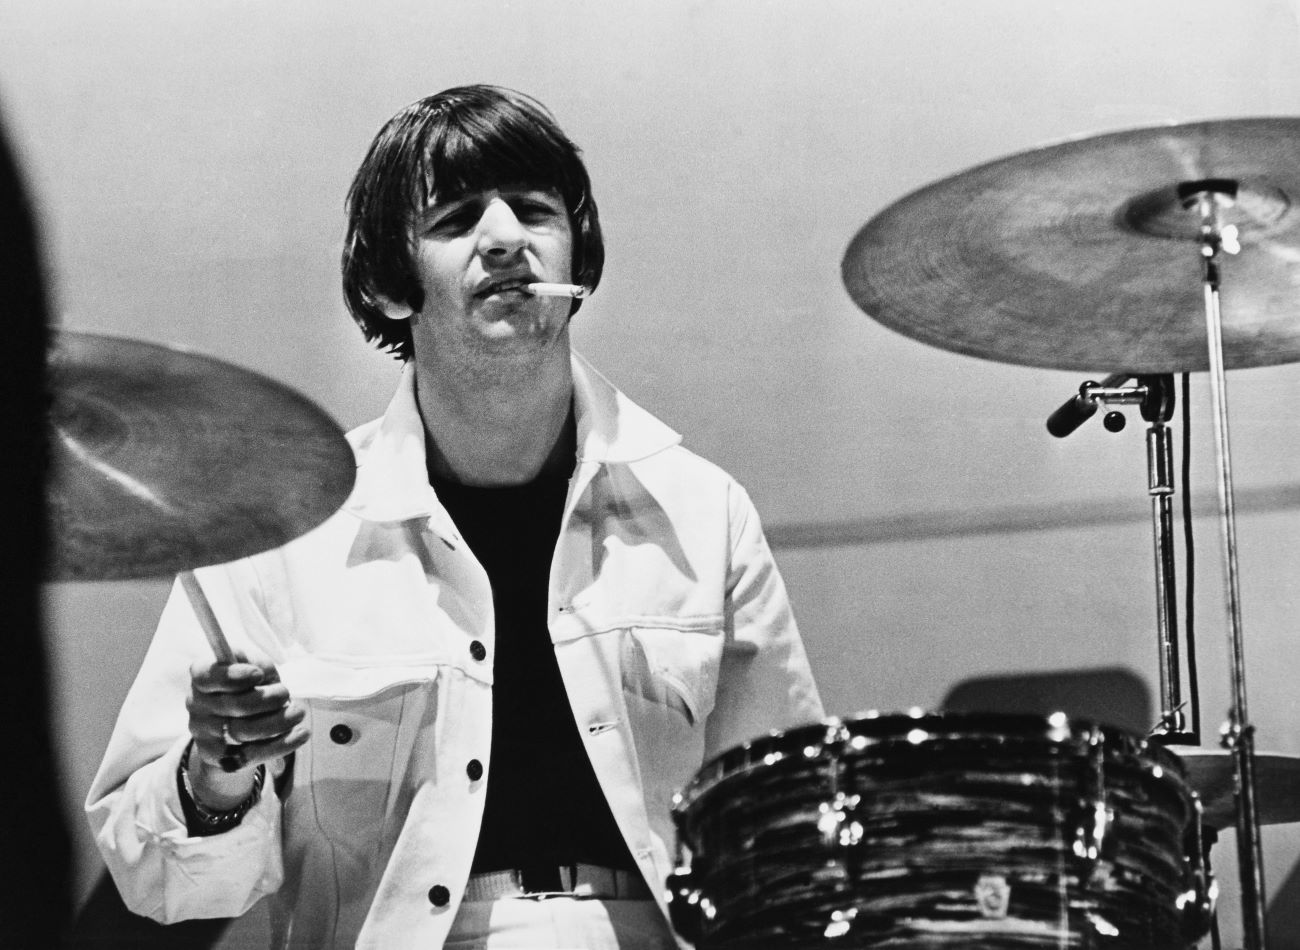 A black and white picture of Ringo Starr drumming with a cigarette in his mouth.